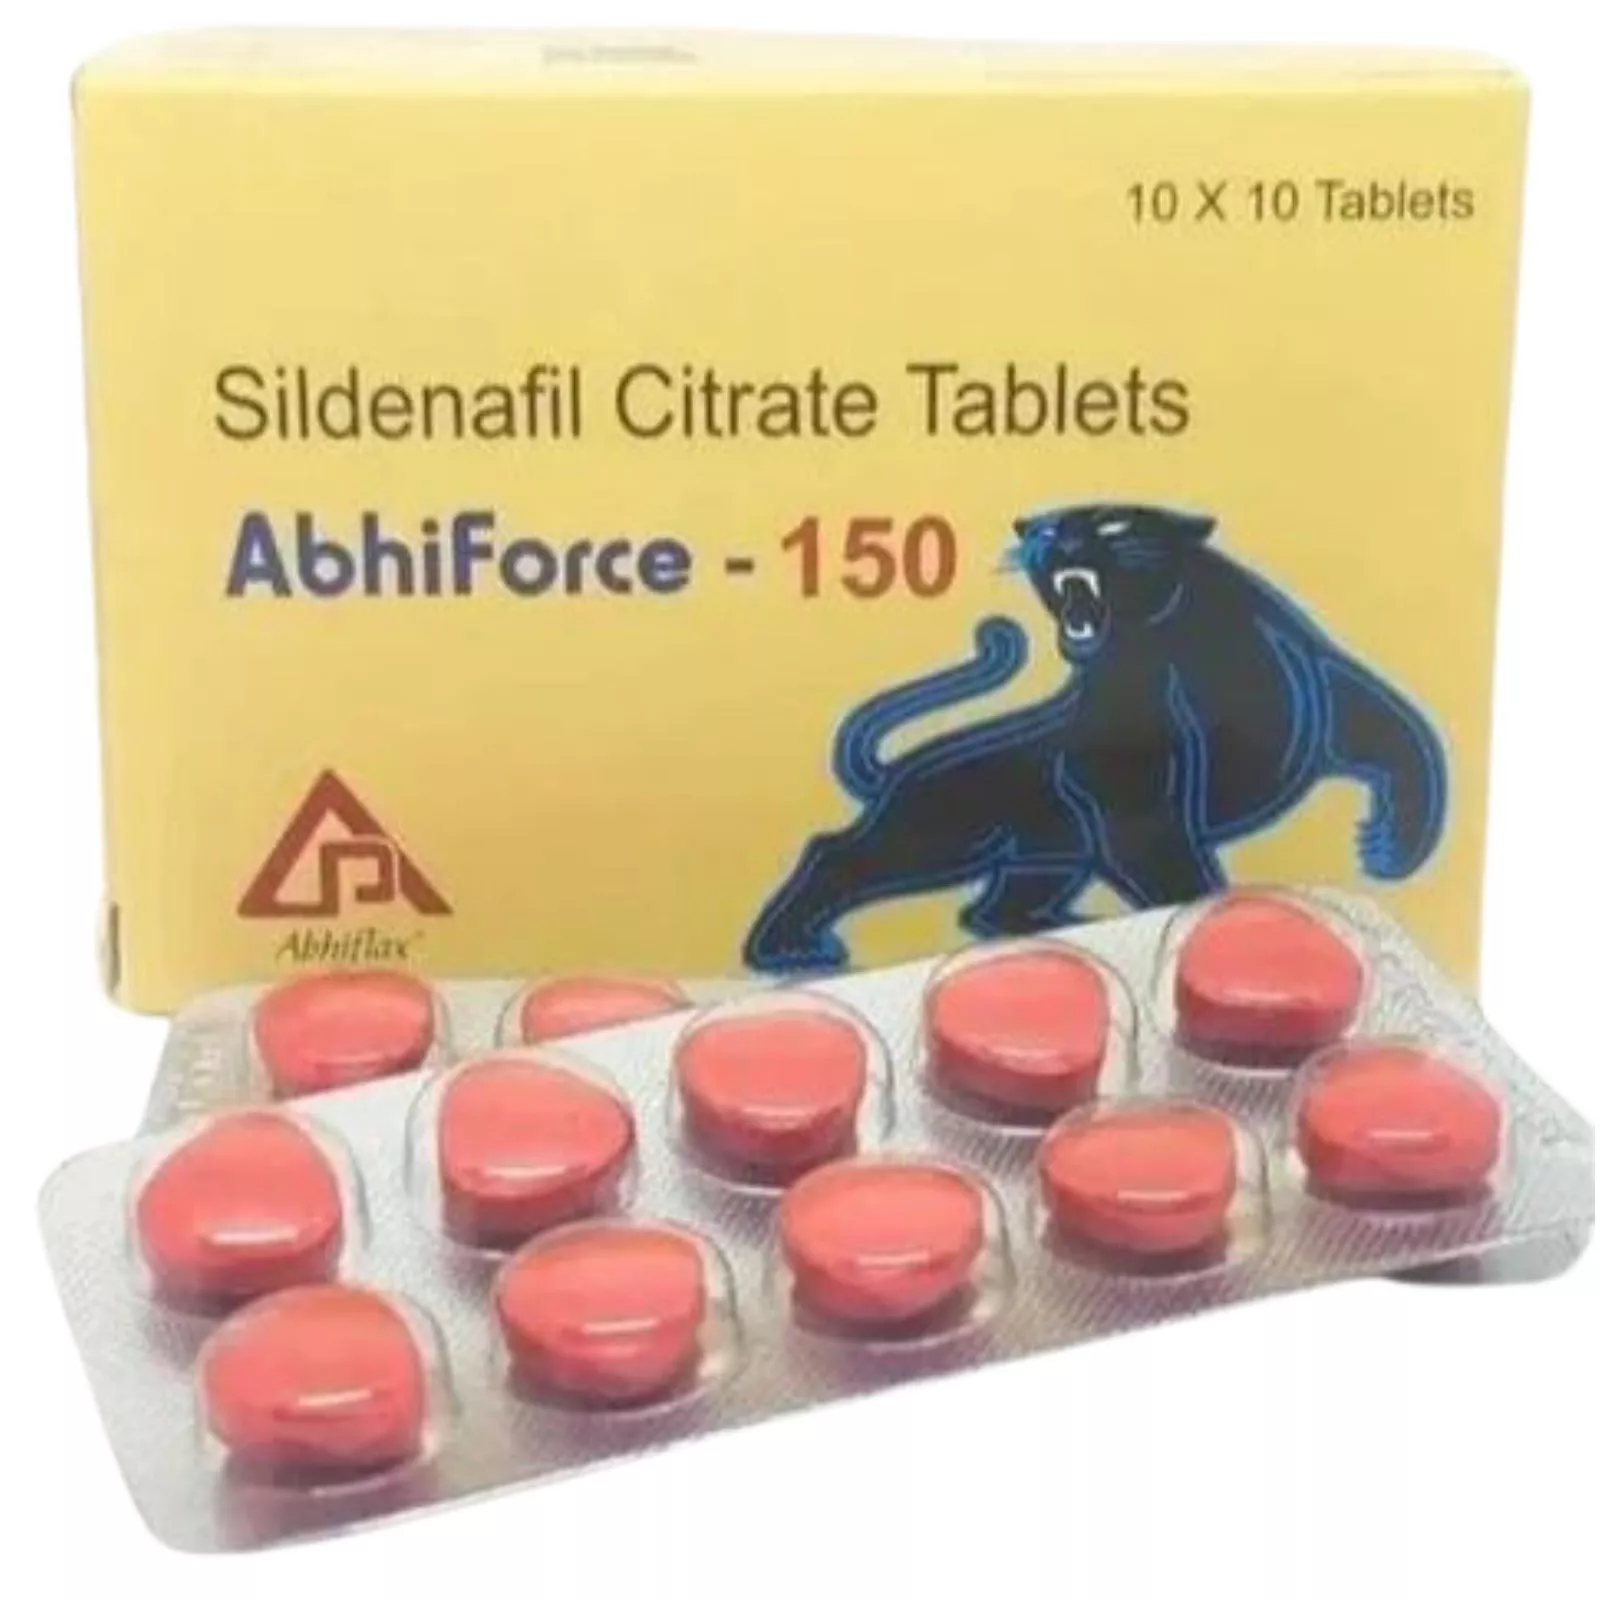 Extra strong dose of 150 mg of Sildenafil for Erectile Dysfunction